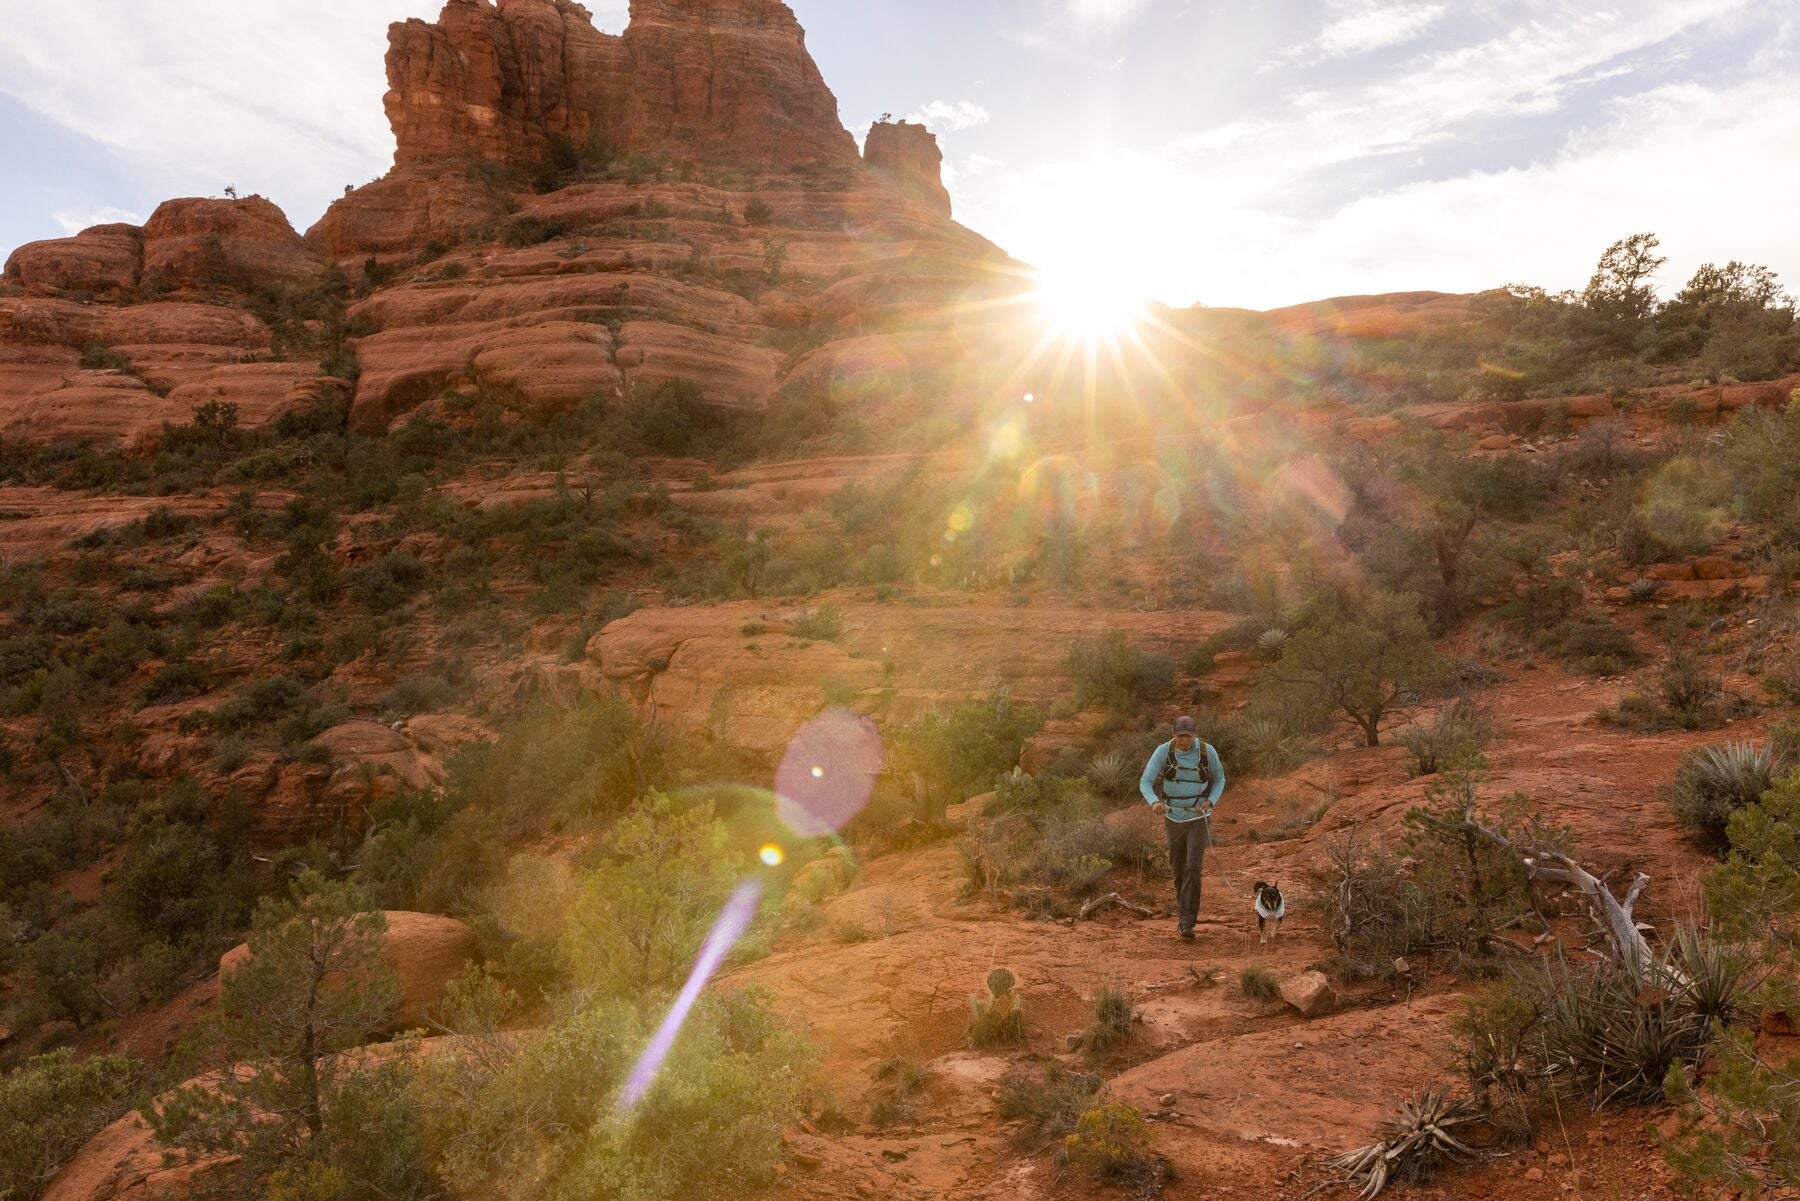 Vernan Kee and one of his dogs go on a trail run in the Navajo Nation.